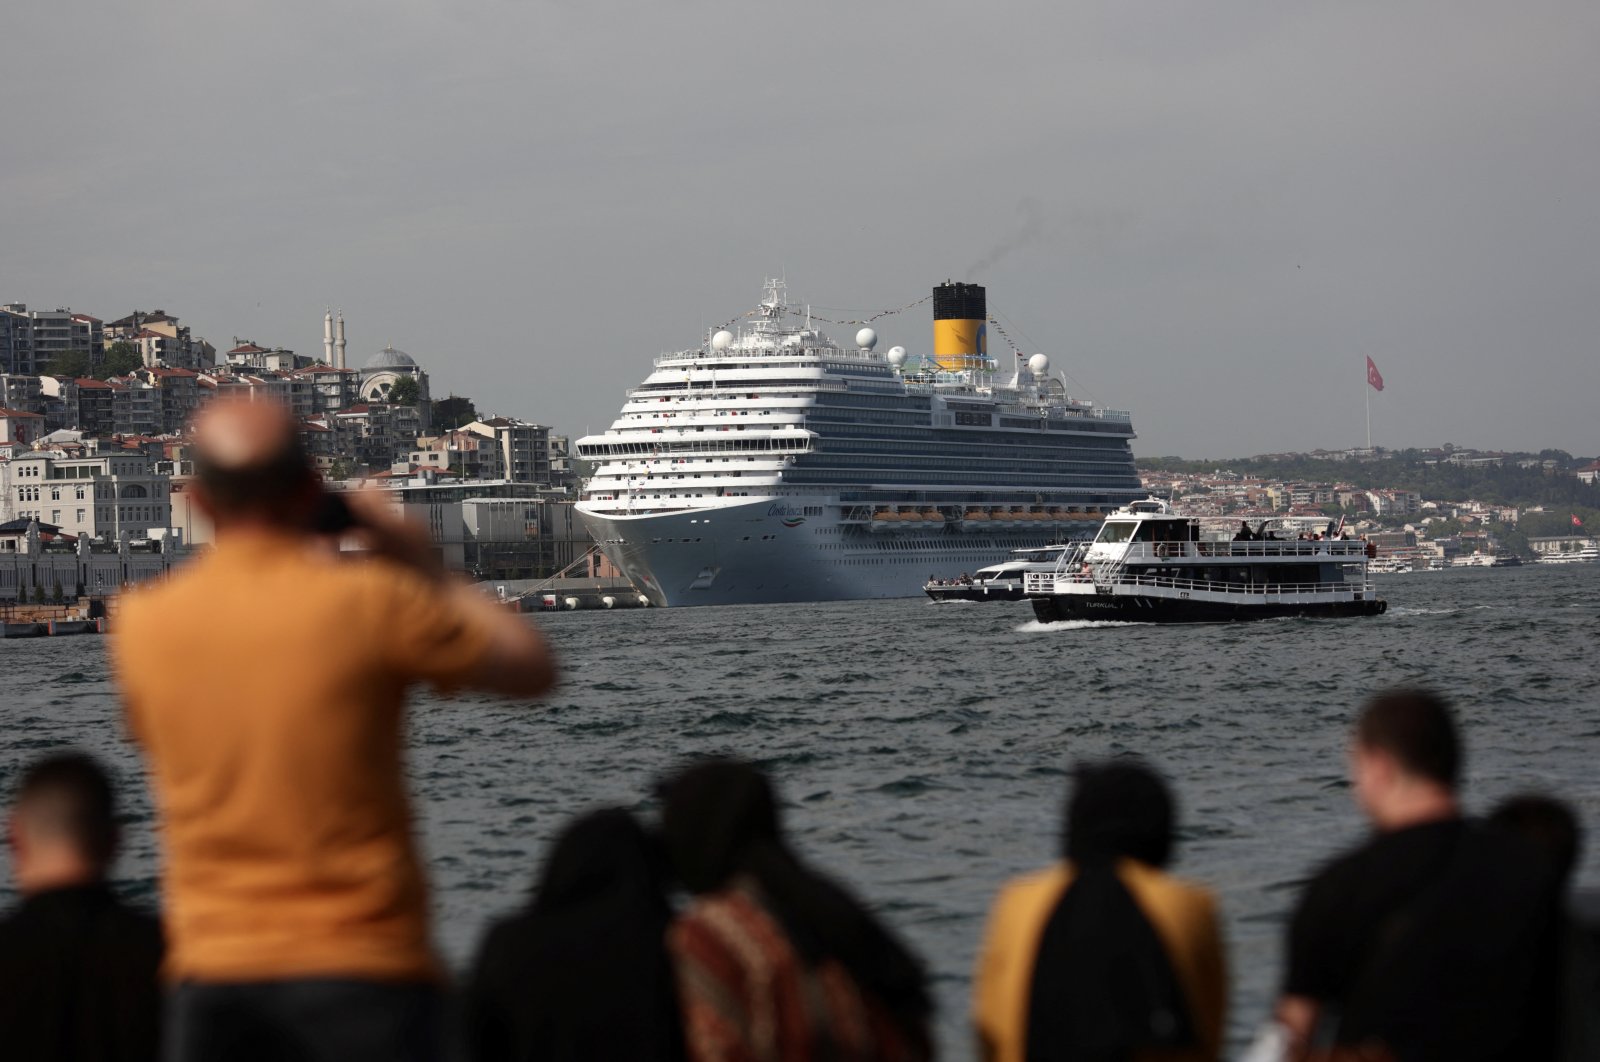 The Costa Venezia cruise ship is docked at Galataport in Istanbul, Turkey, May 22, 2022. (Reuters Photo)